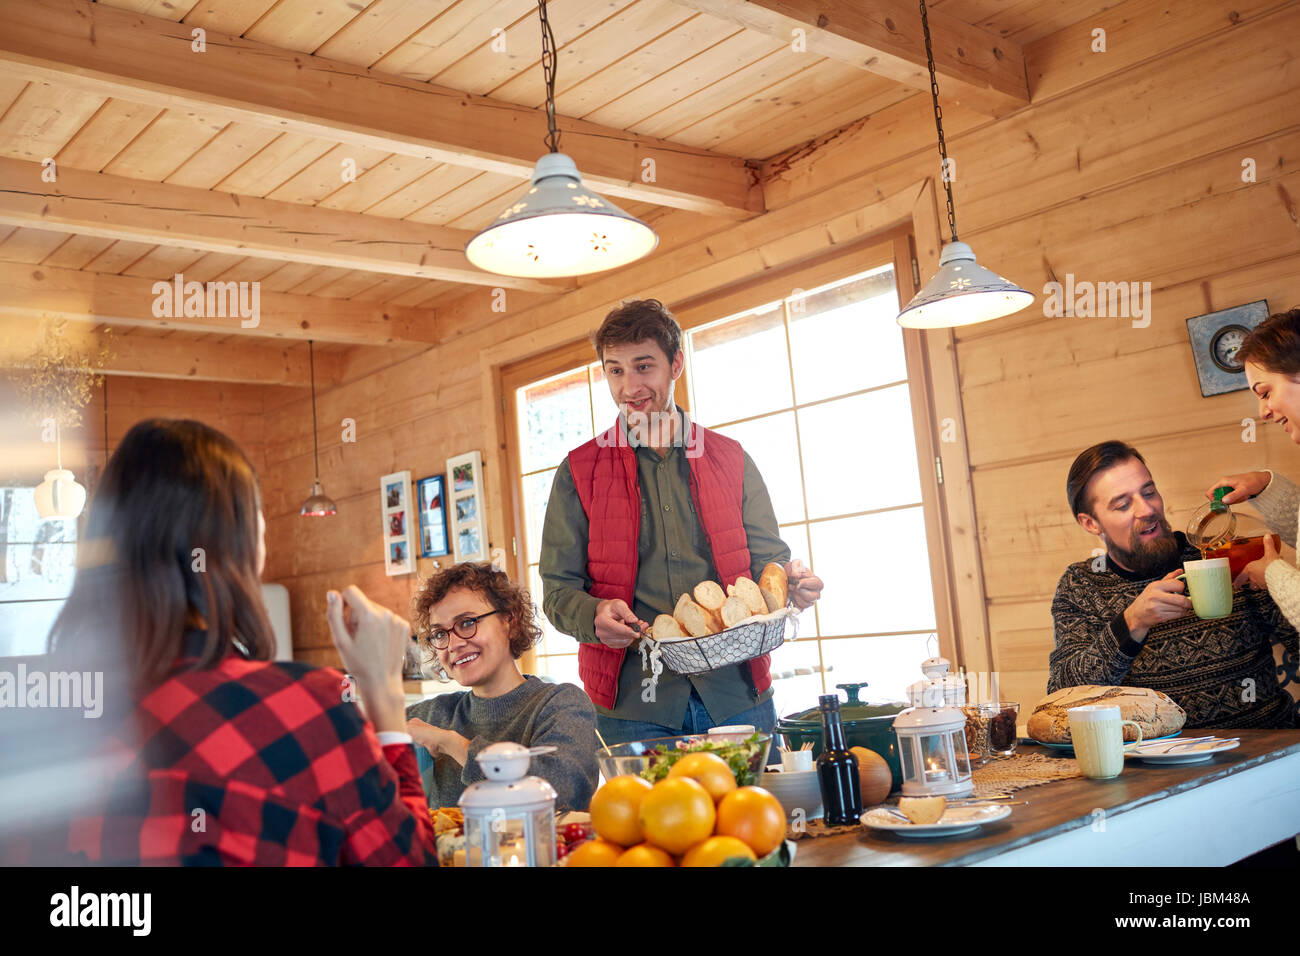 Friends serving and eating food in cabin Stock Photo